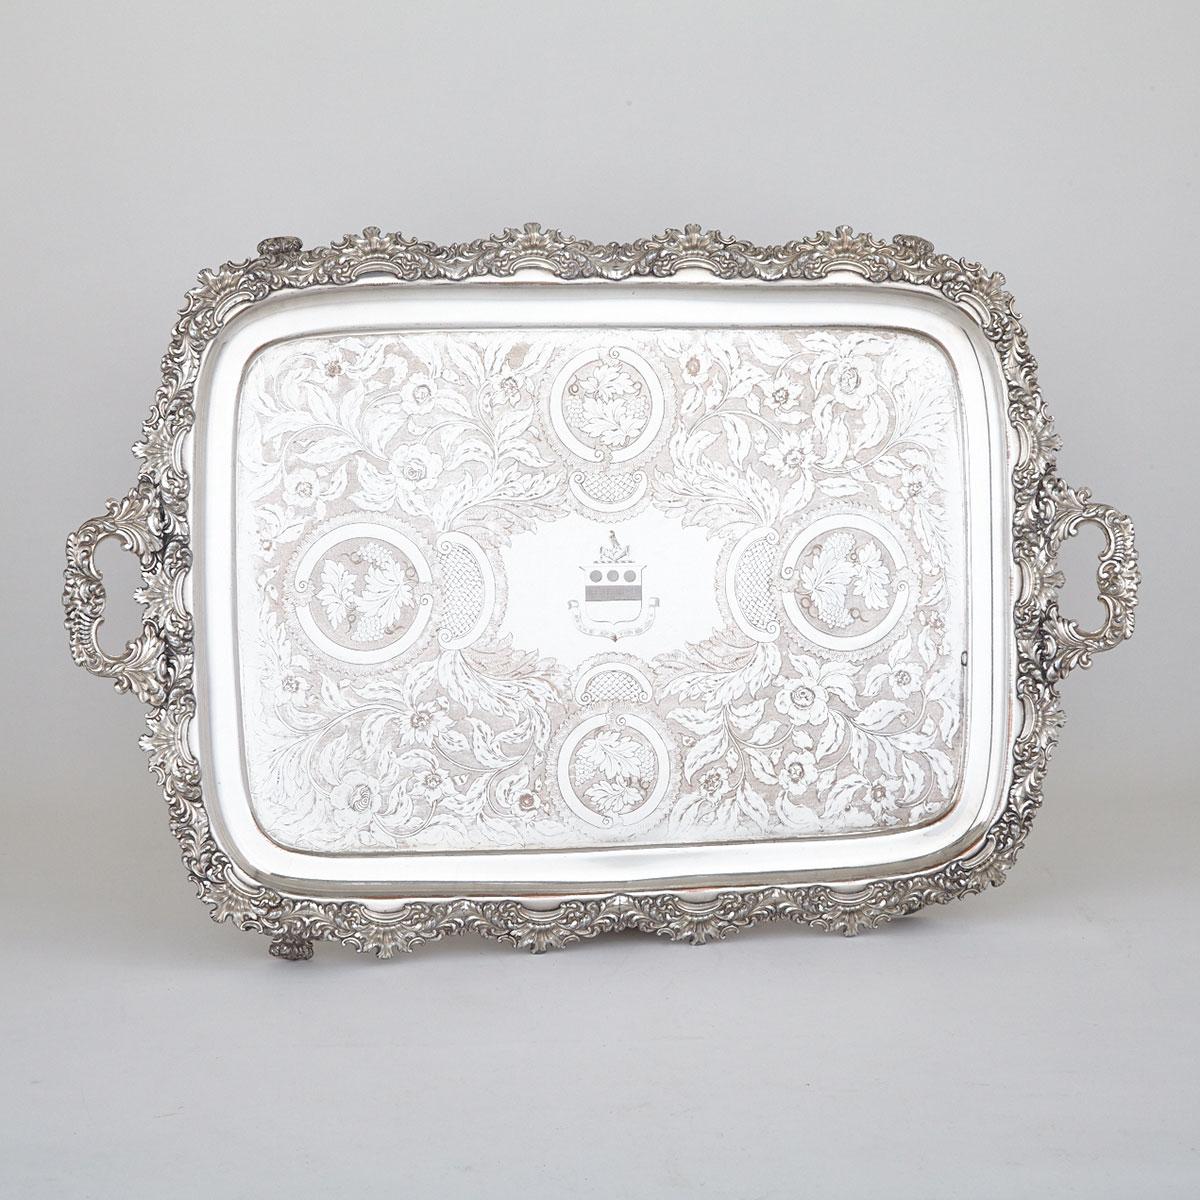 Old Sheffield Plate Two-Handled Rectangular Serving Tray, c.1825